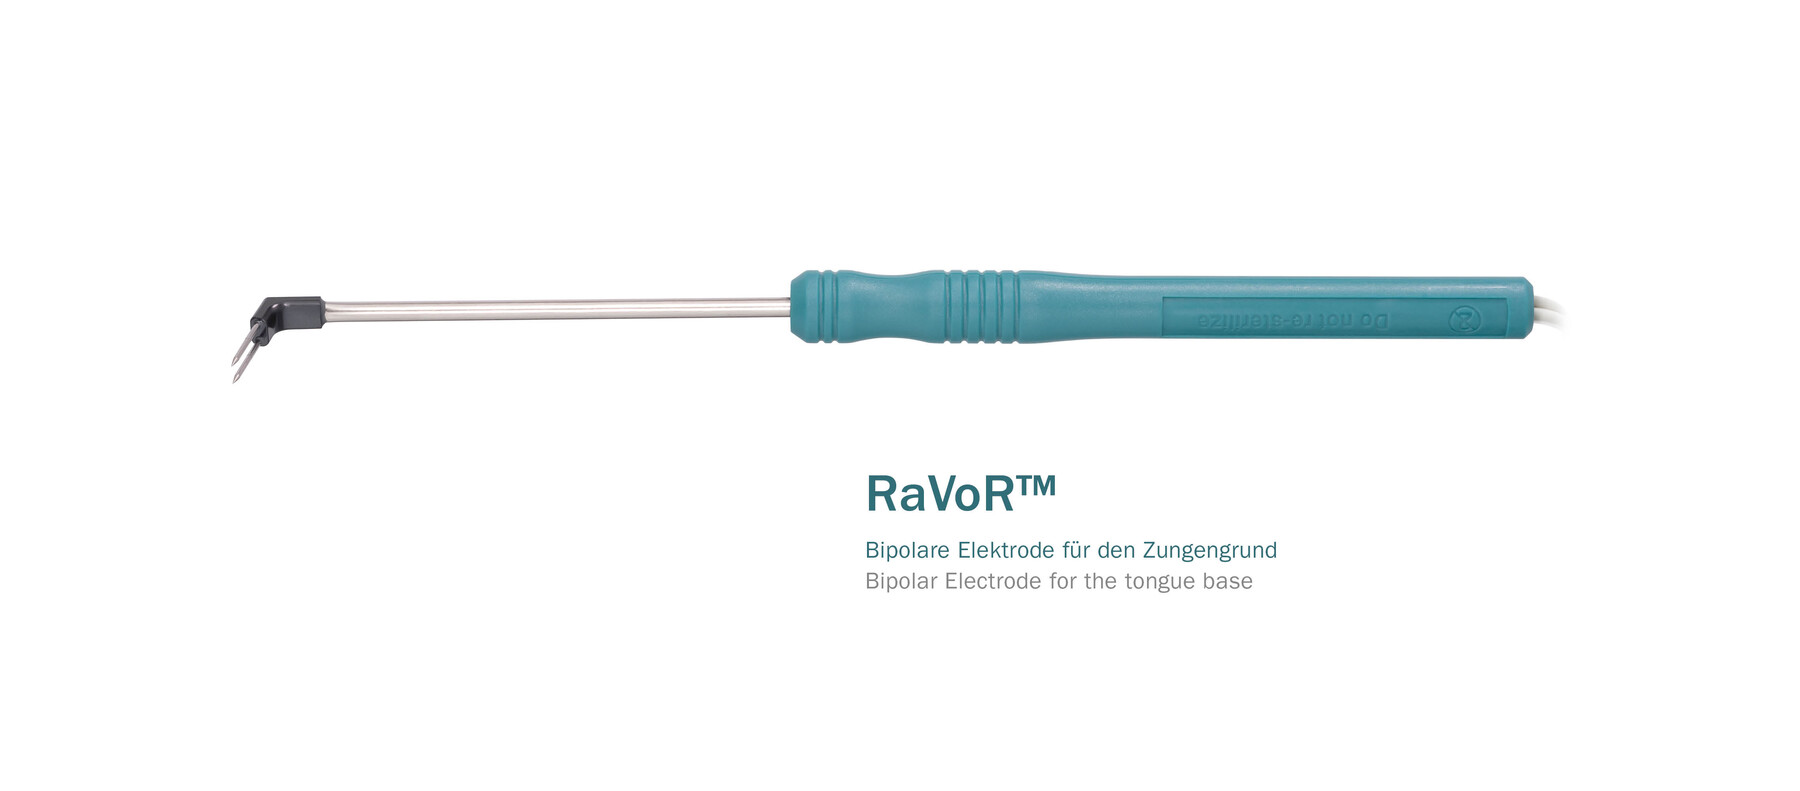 RaVoR™ for the tongue base